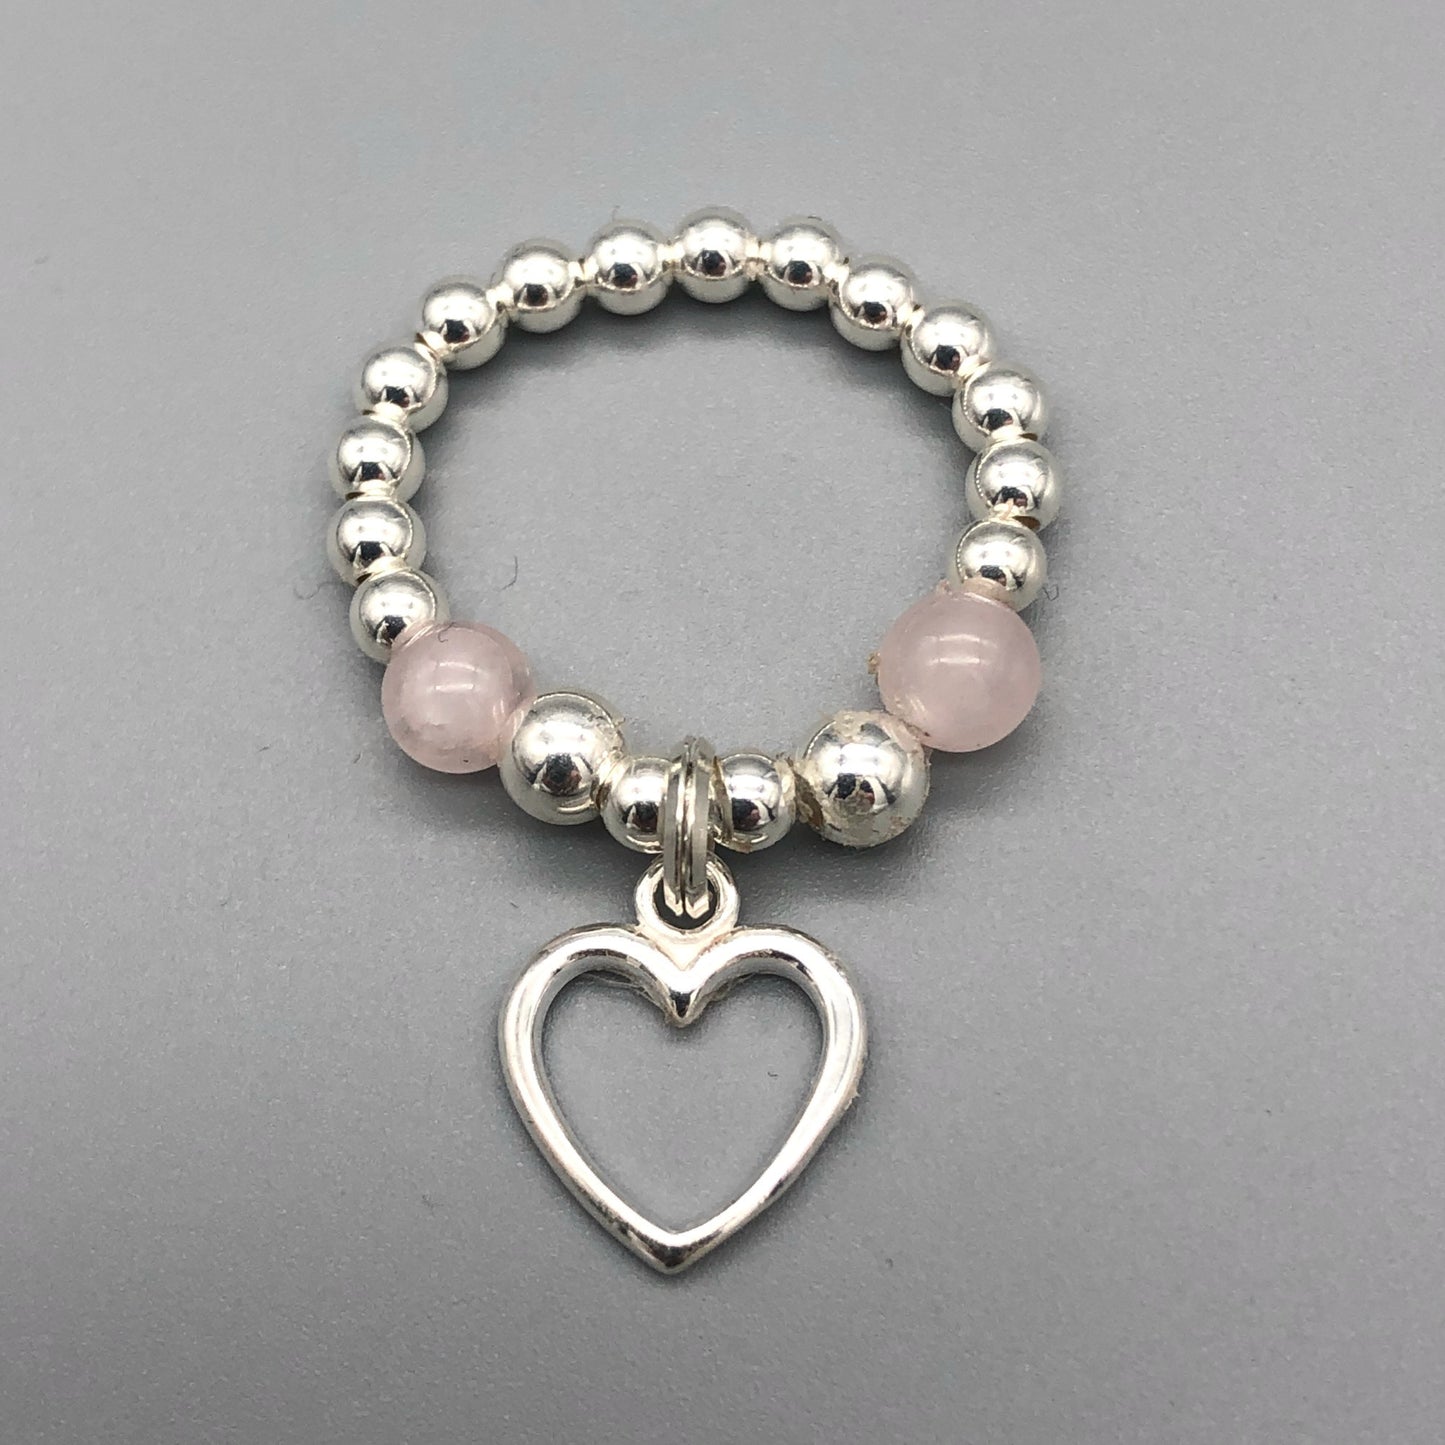 Open heart charm rose quartz & sterling silver girl's beaded stacking ring by My Silver Wish